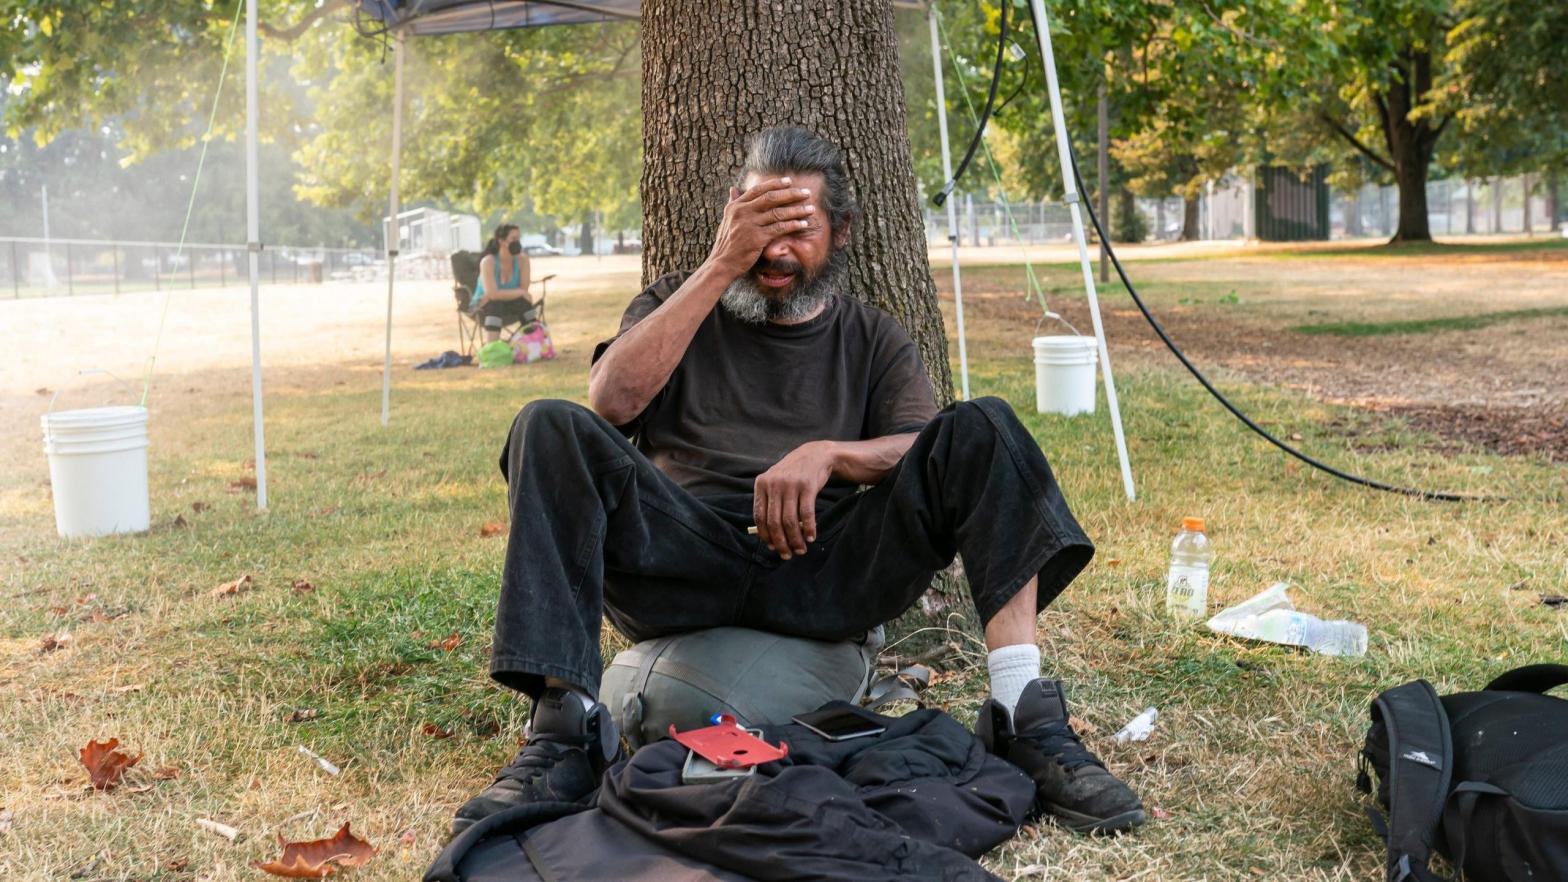 An unhoused man who asked to not be named tries to stay cool near a misting station in Lents Park during an extreme heat wave on Aug. 13, 2021 in Portland, Oregon. (Photo: Nathan Howard, Getty Images)